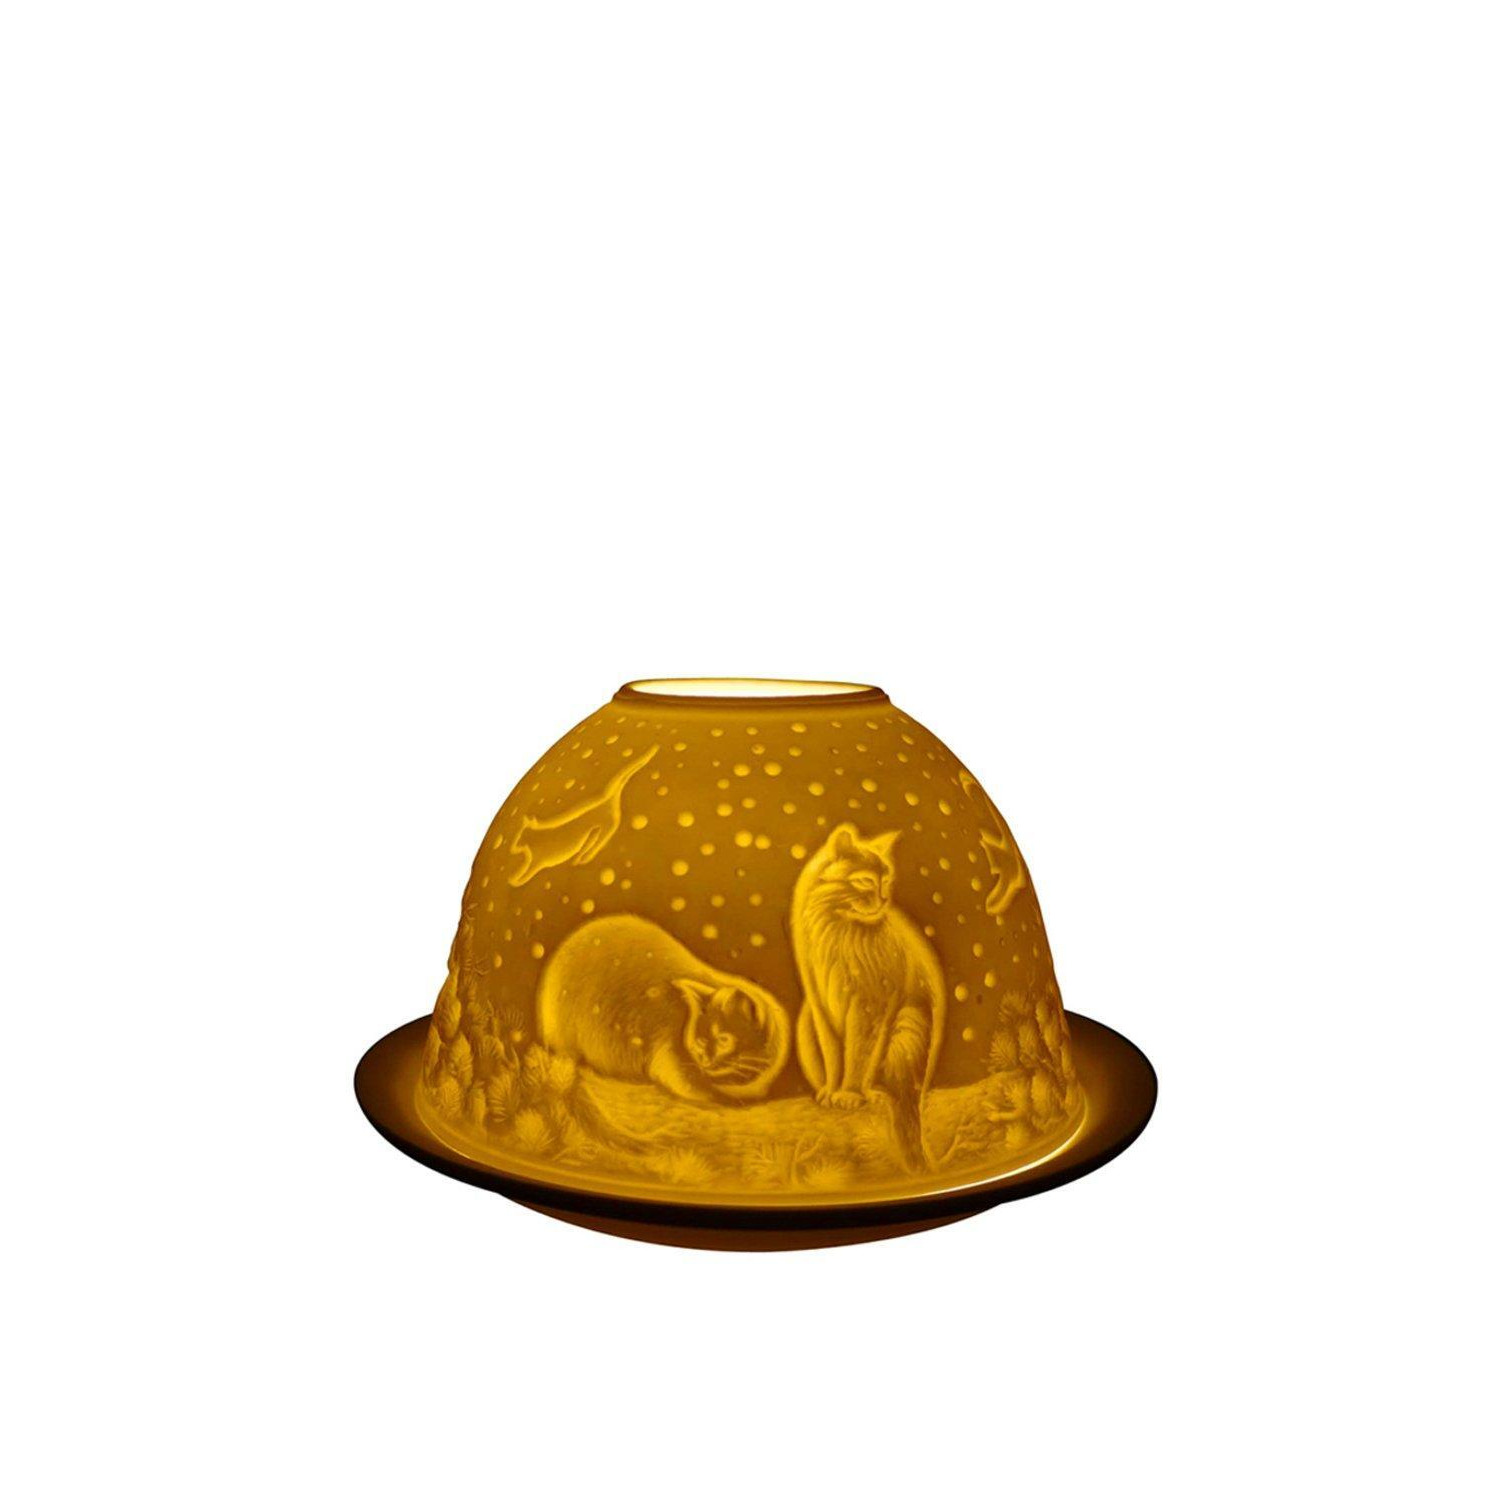 Light-Glow Cats at Night Candle Holder Dome - image 1